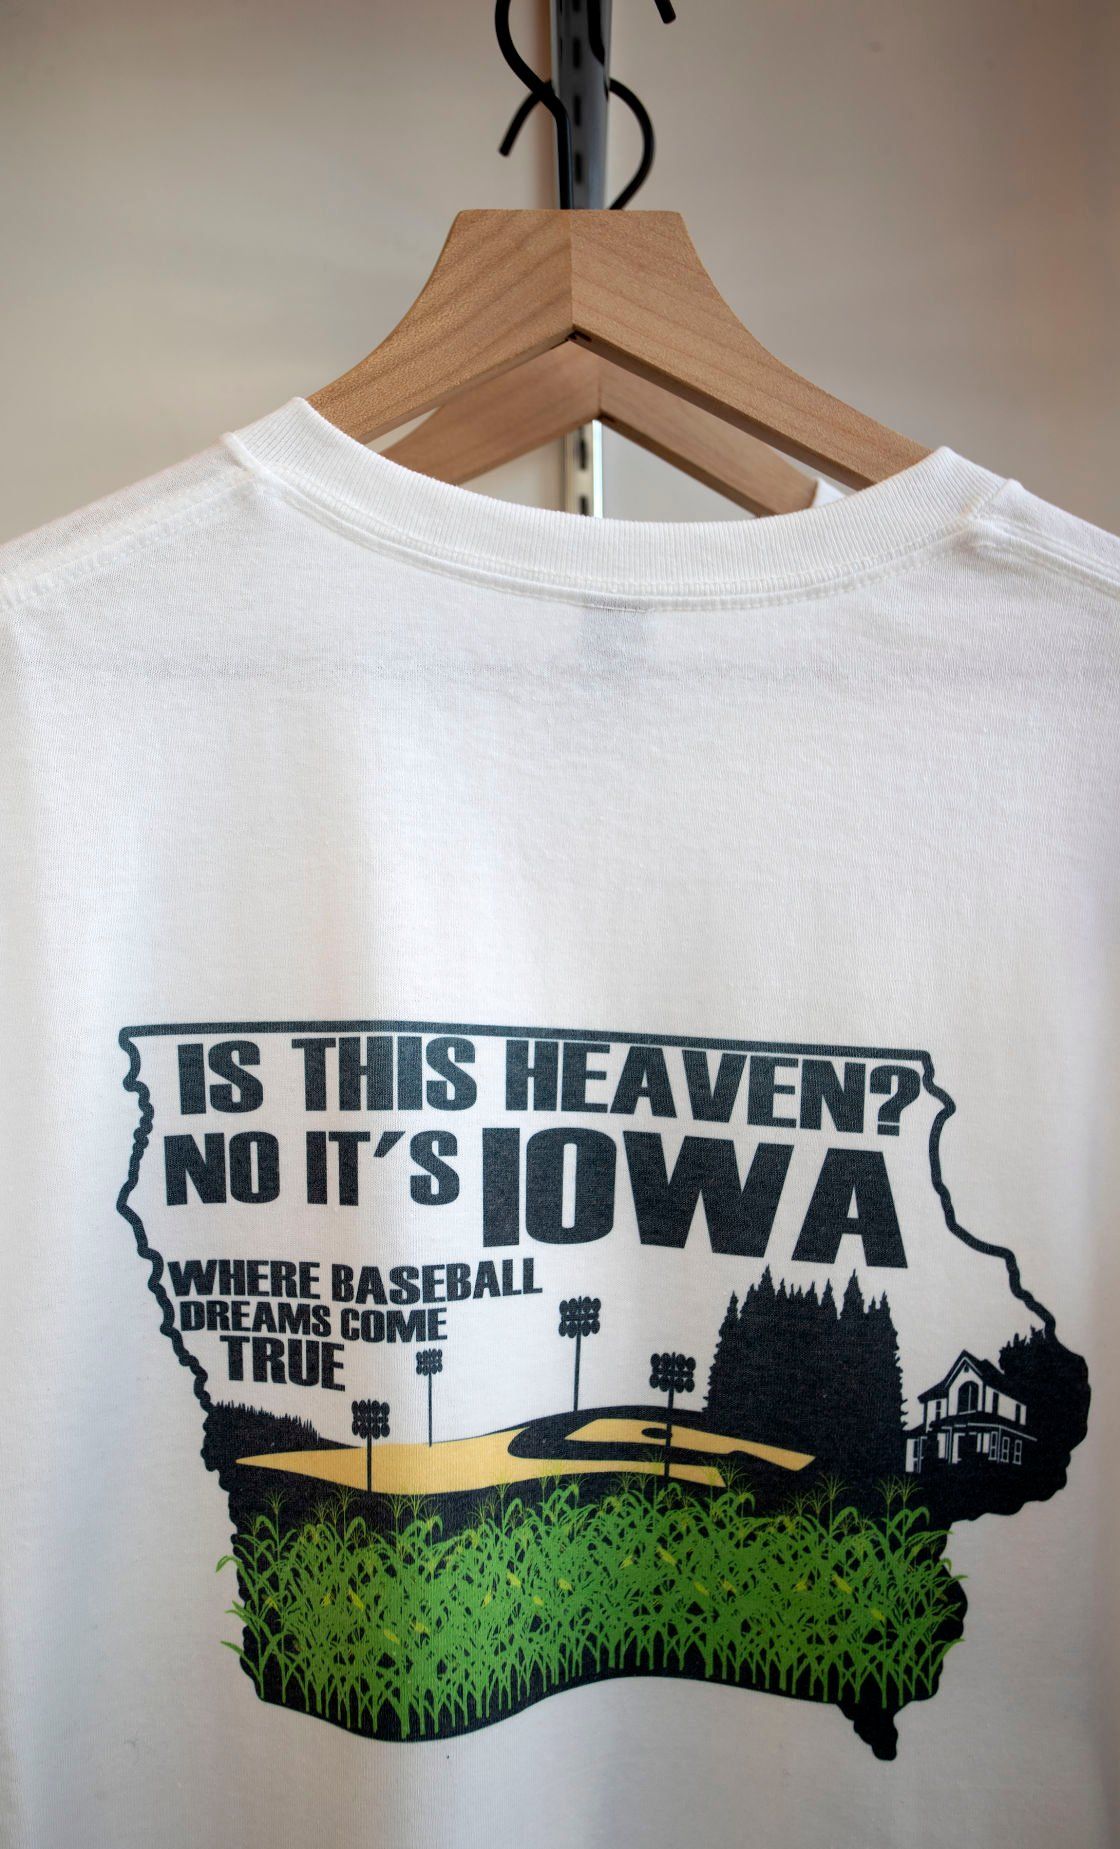 A Field of Dreams-themed shirt is on sale at Haberdash Outfitters Co. in Dyersville, Iowa. Photo Taken Tuesday, August 2, 2022.    PHOTO CREDIT: Stephen Gassman